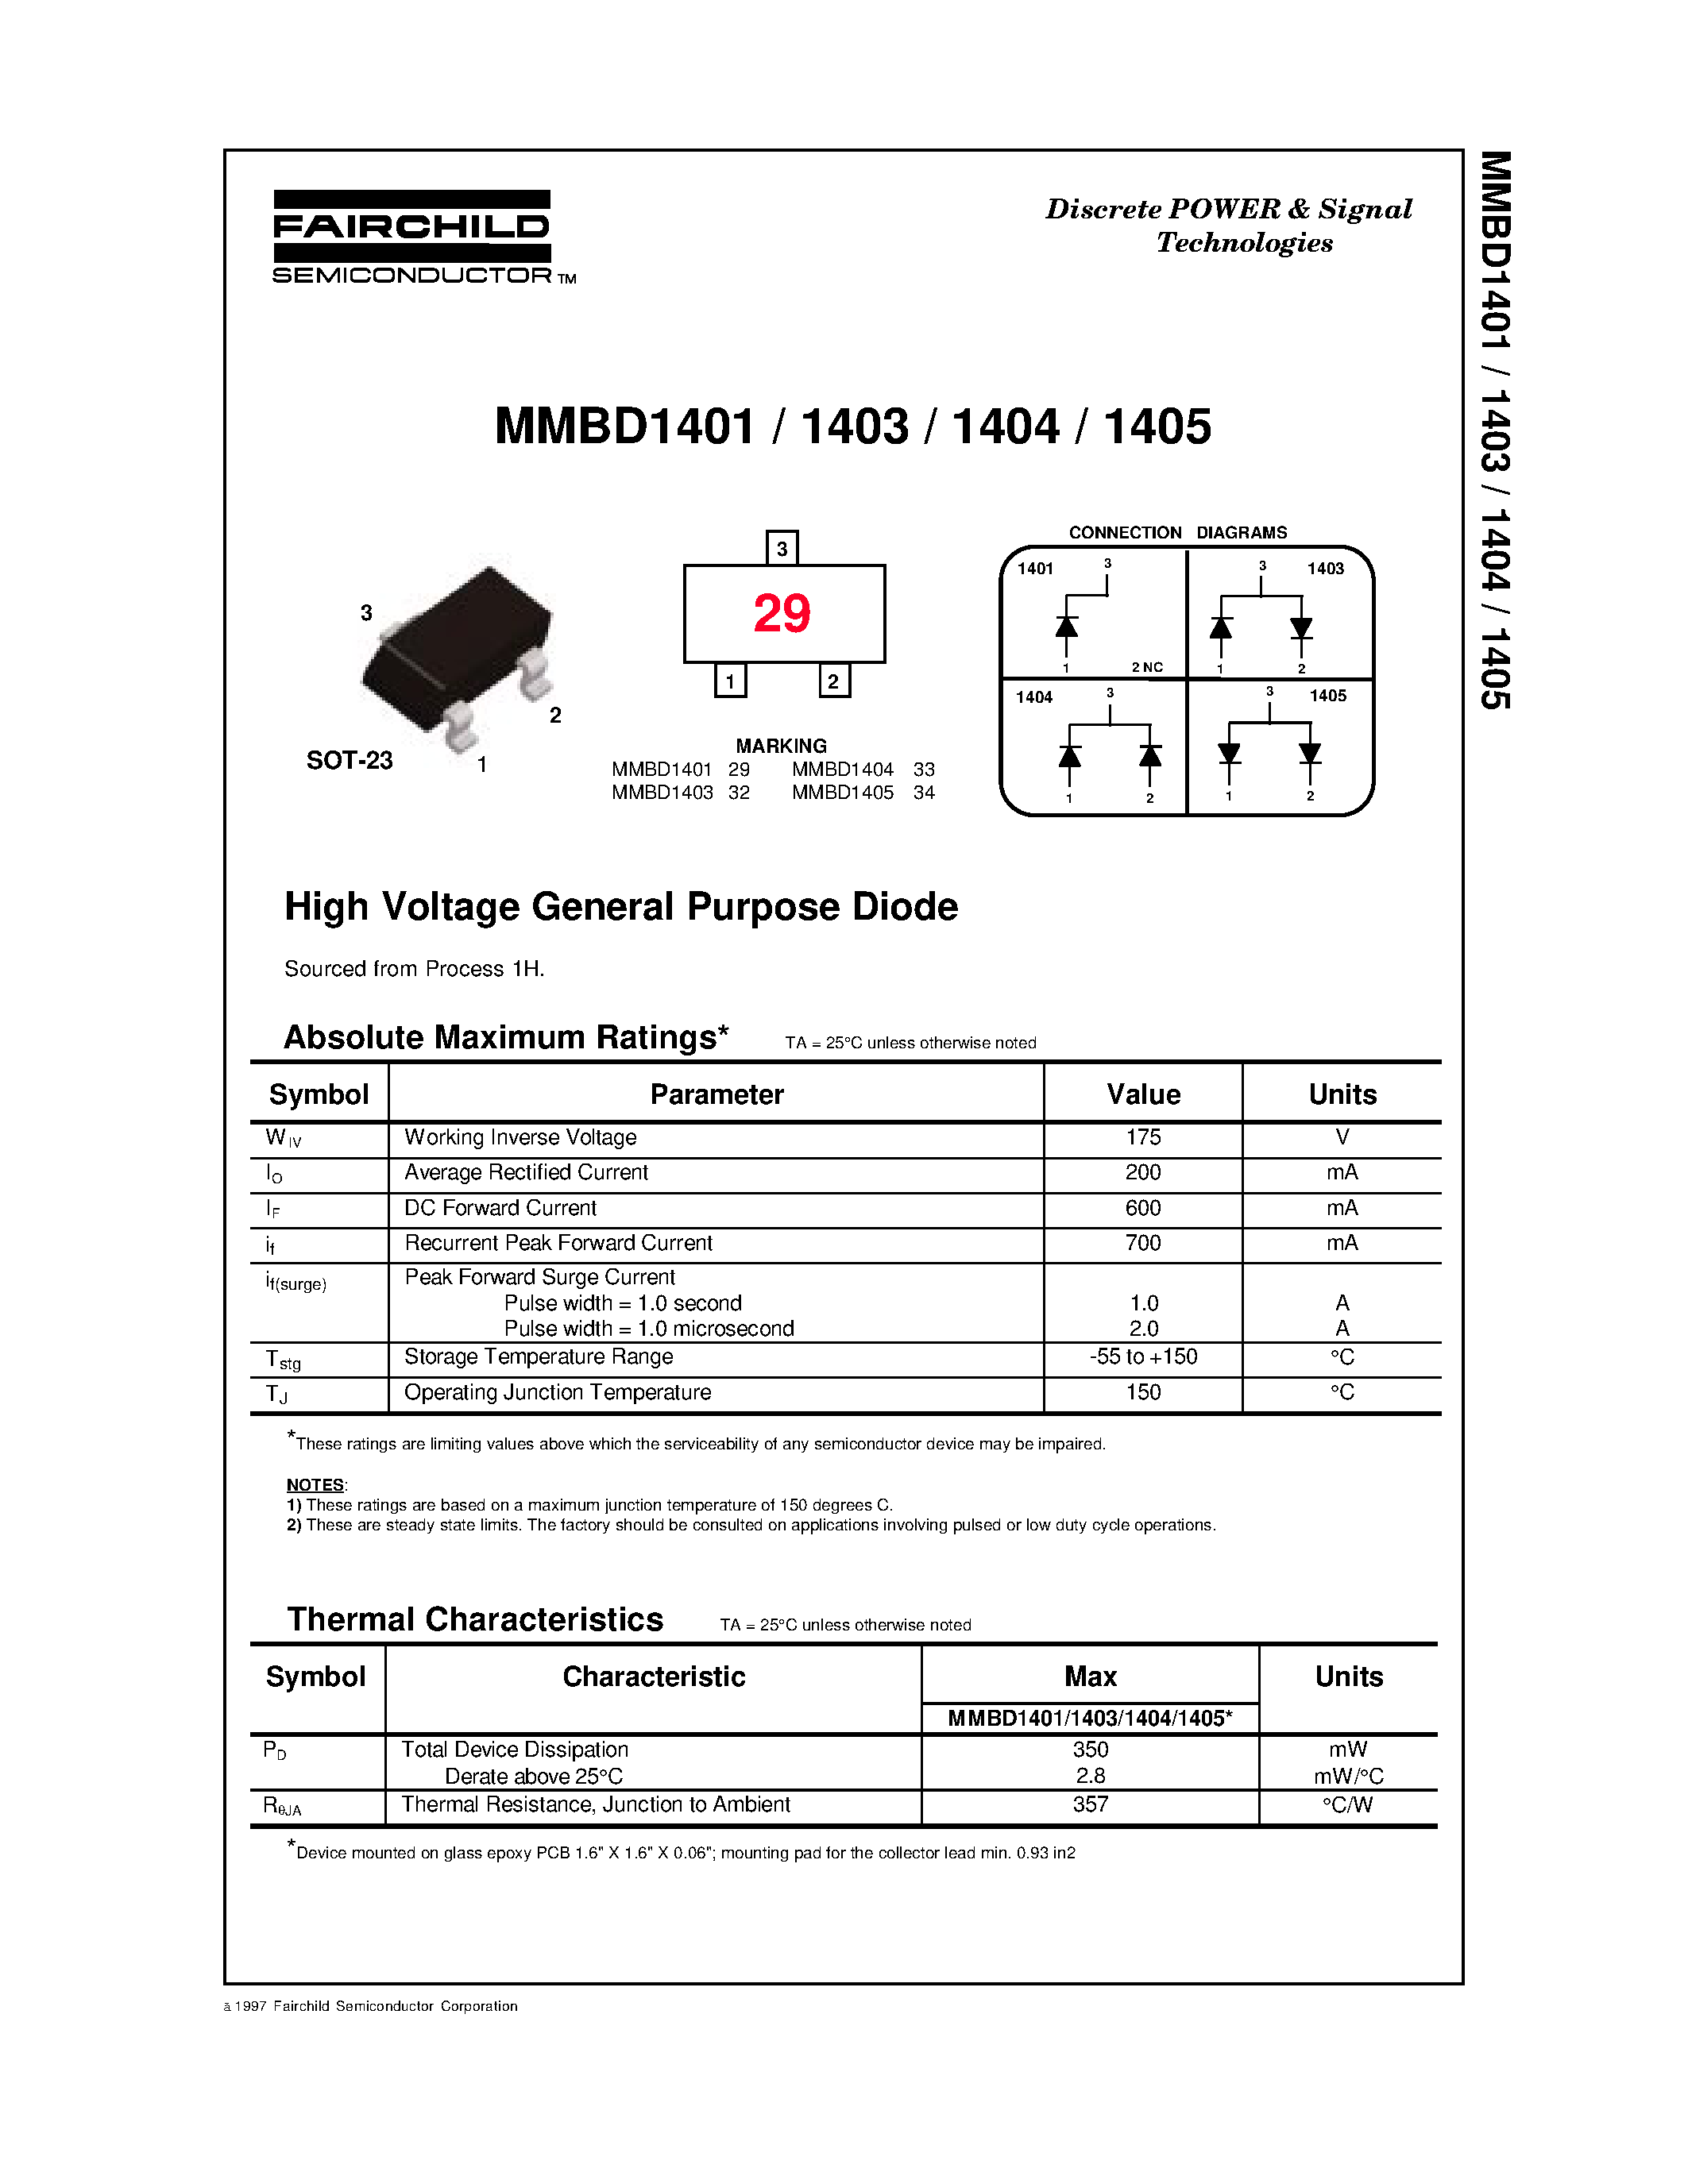 Даташит MMBD1404 - High Voltage General Purpose Diode страница 1